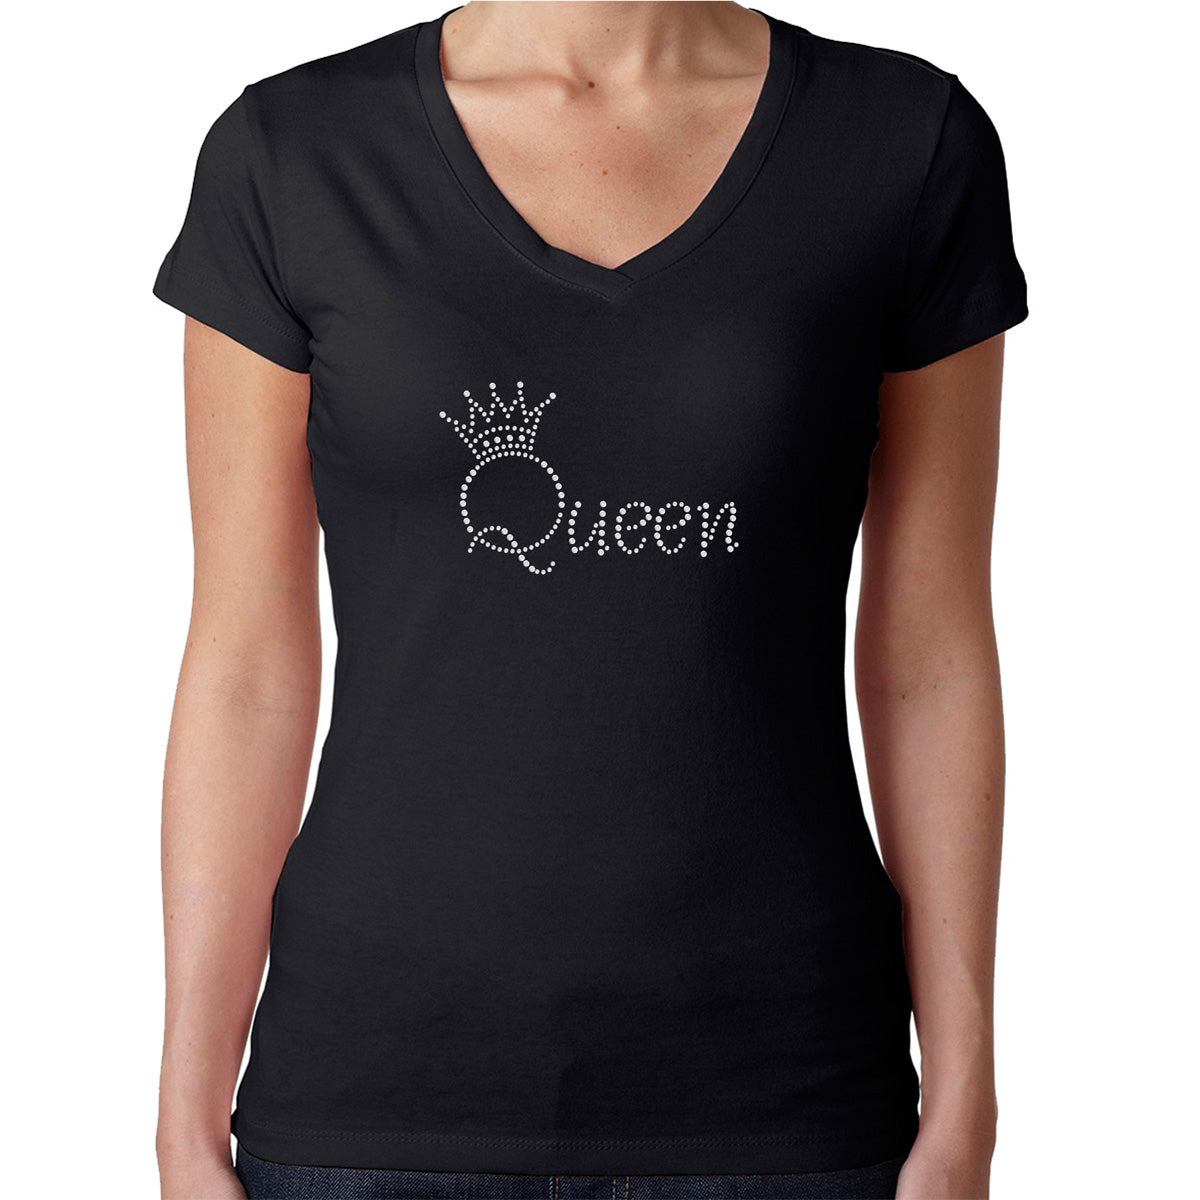 Womens T-Shirt Rhinestone Bling Black Fitted Tee Queen Crown Crystal White